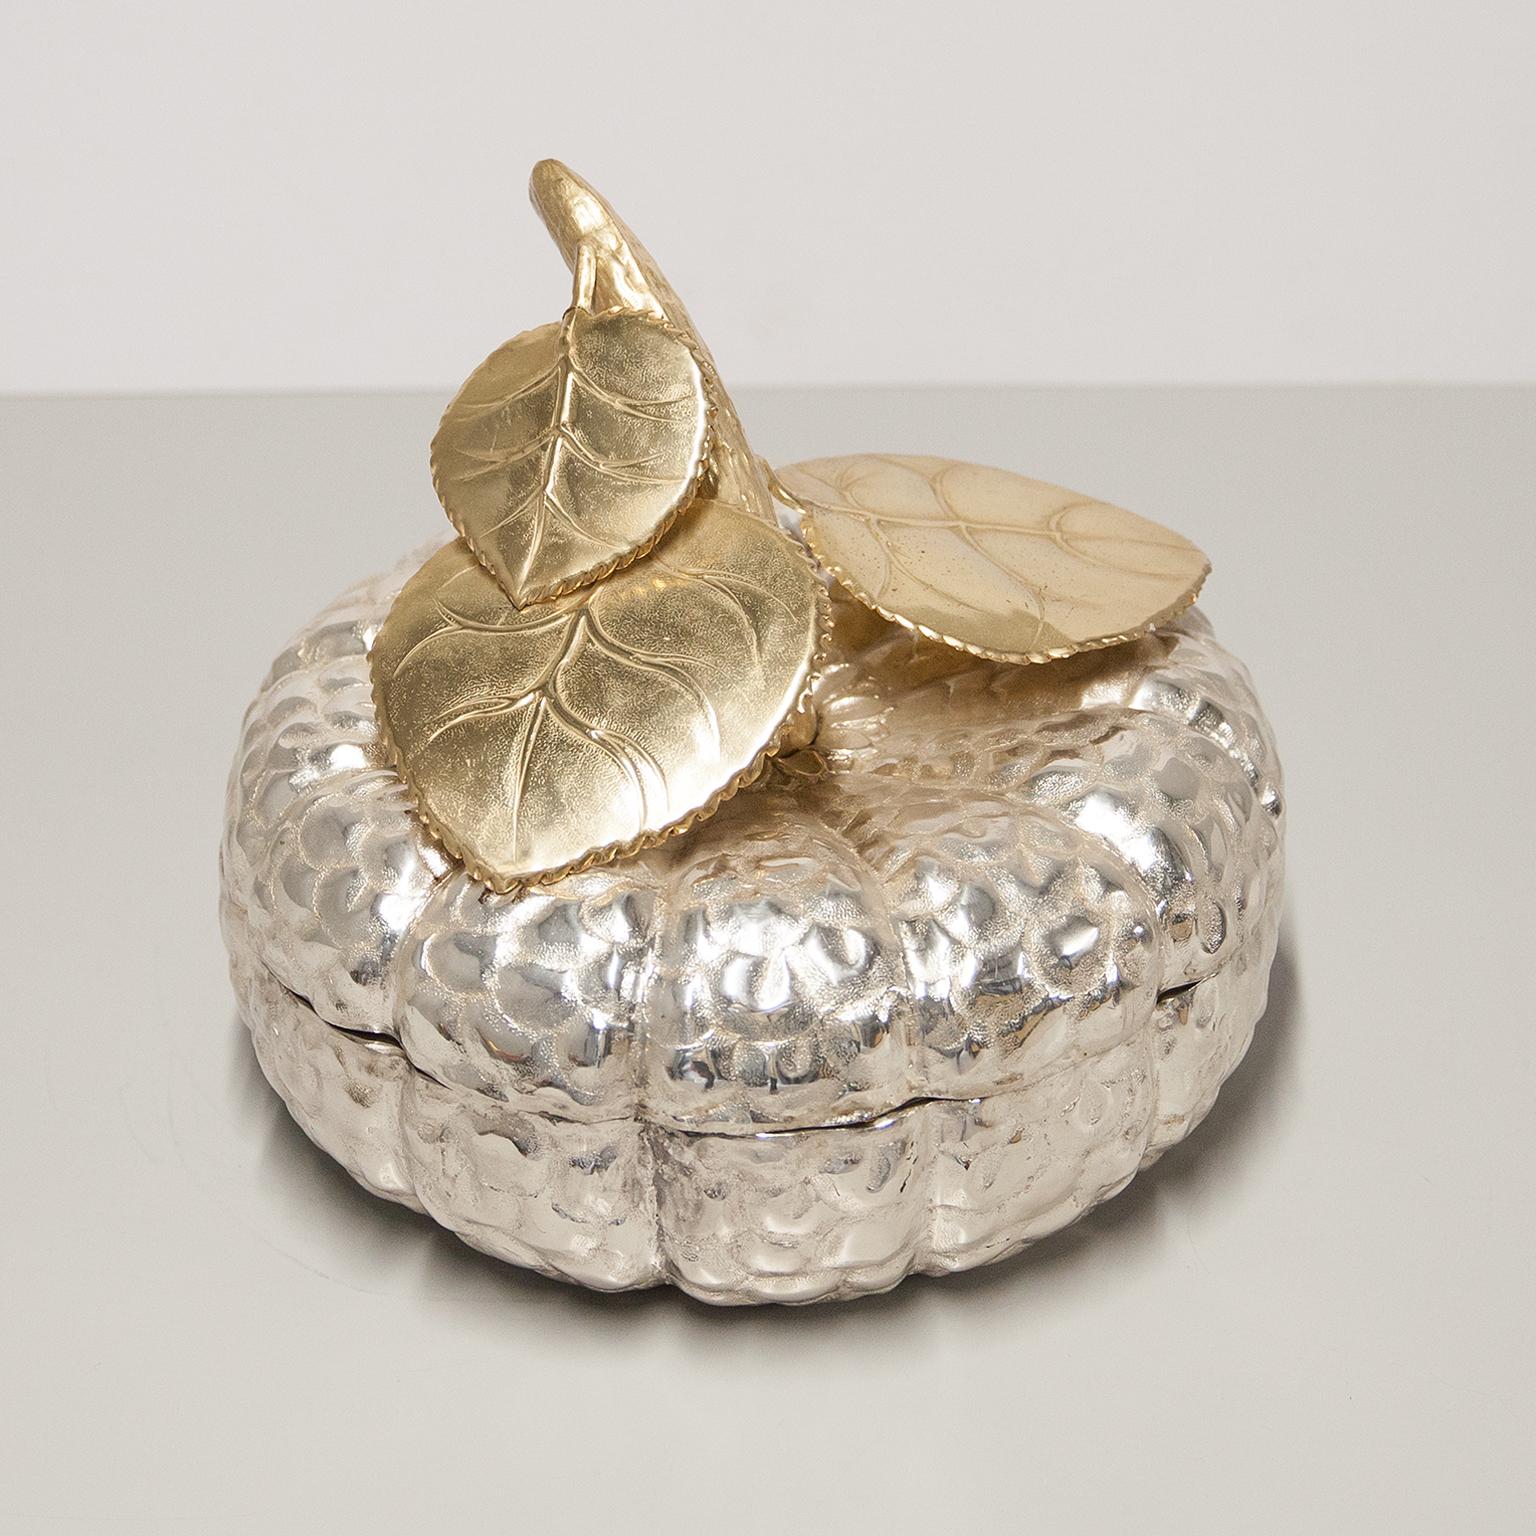 Glamorous Italian silver plated caviar bowl with glass inlay made by Franco Lapini Florence in the 1970s. Very authentic impression of a real pumpkin and a stunning piece for every home décor. Excellent condition.